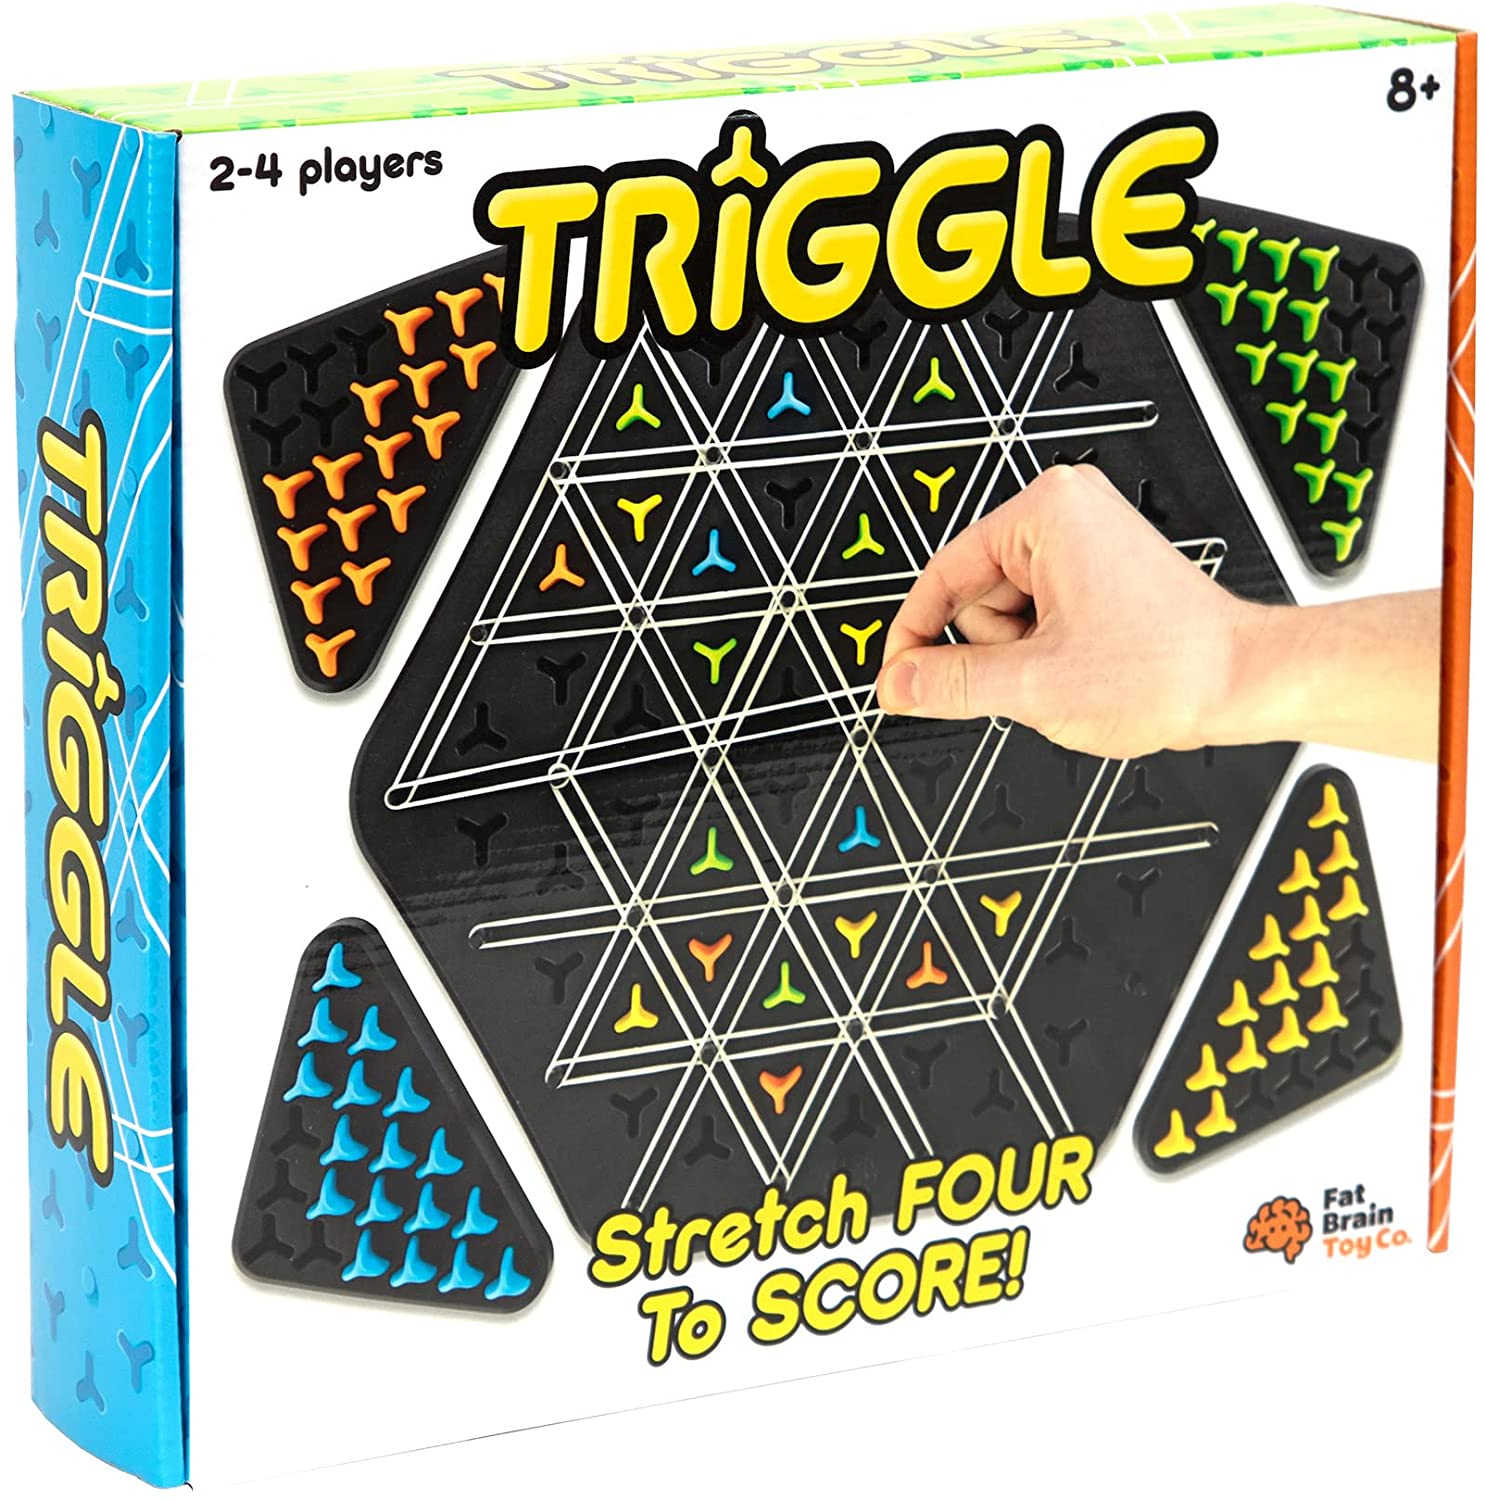 Triangle Tag - Challenging & Highly Energetic Tag Game for Four People